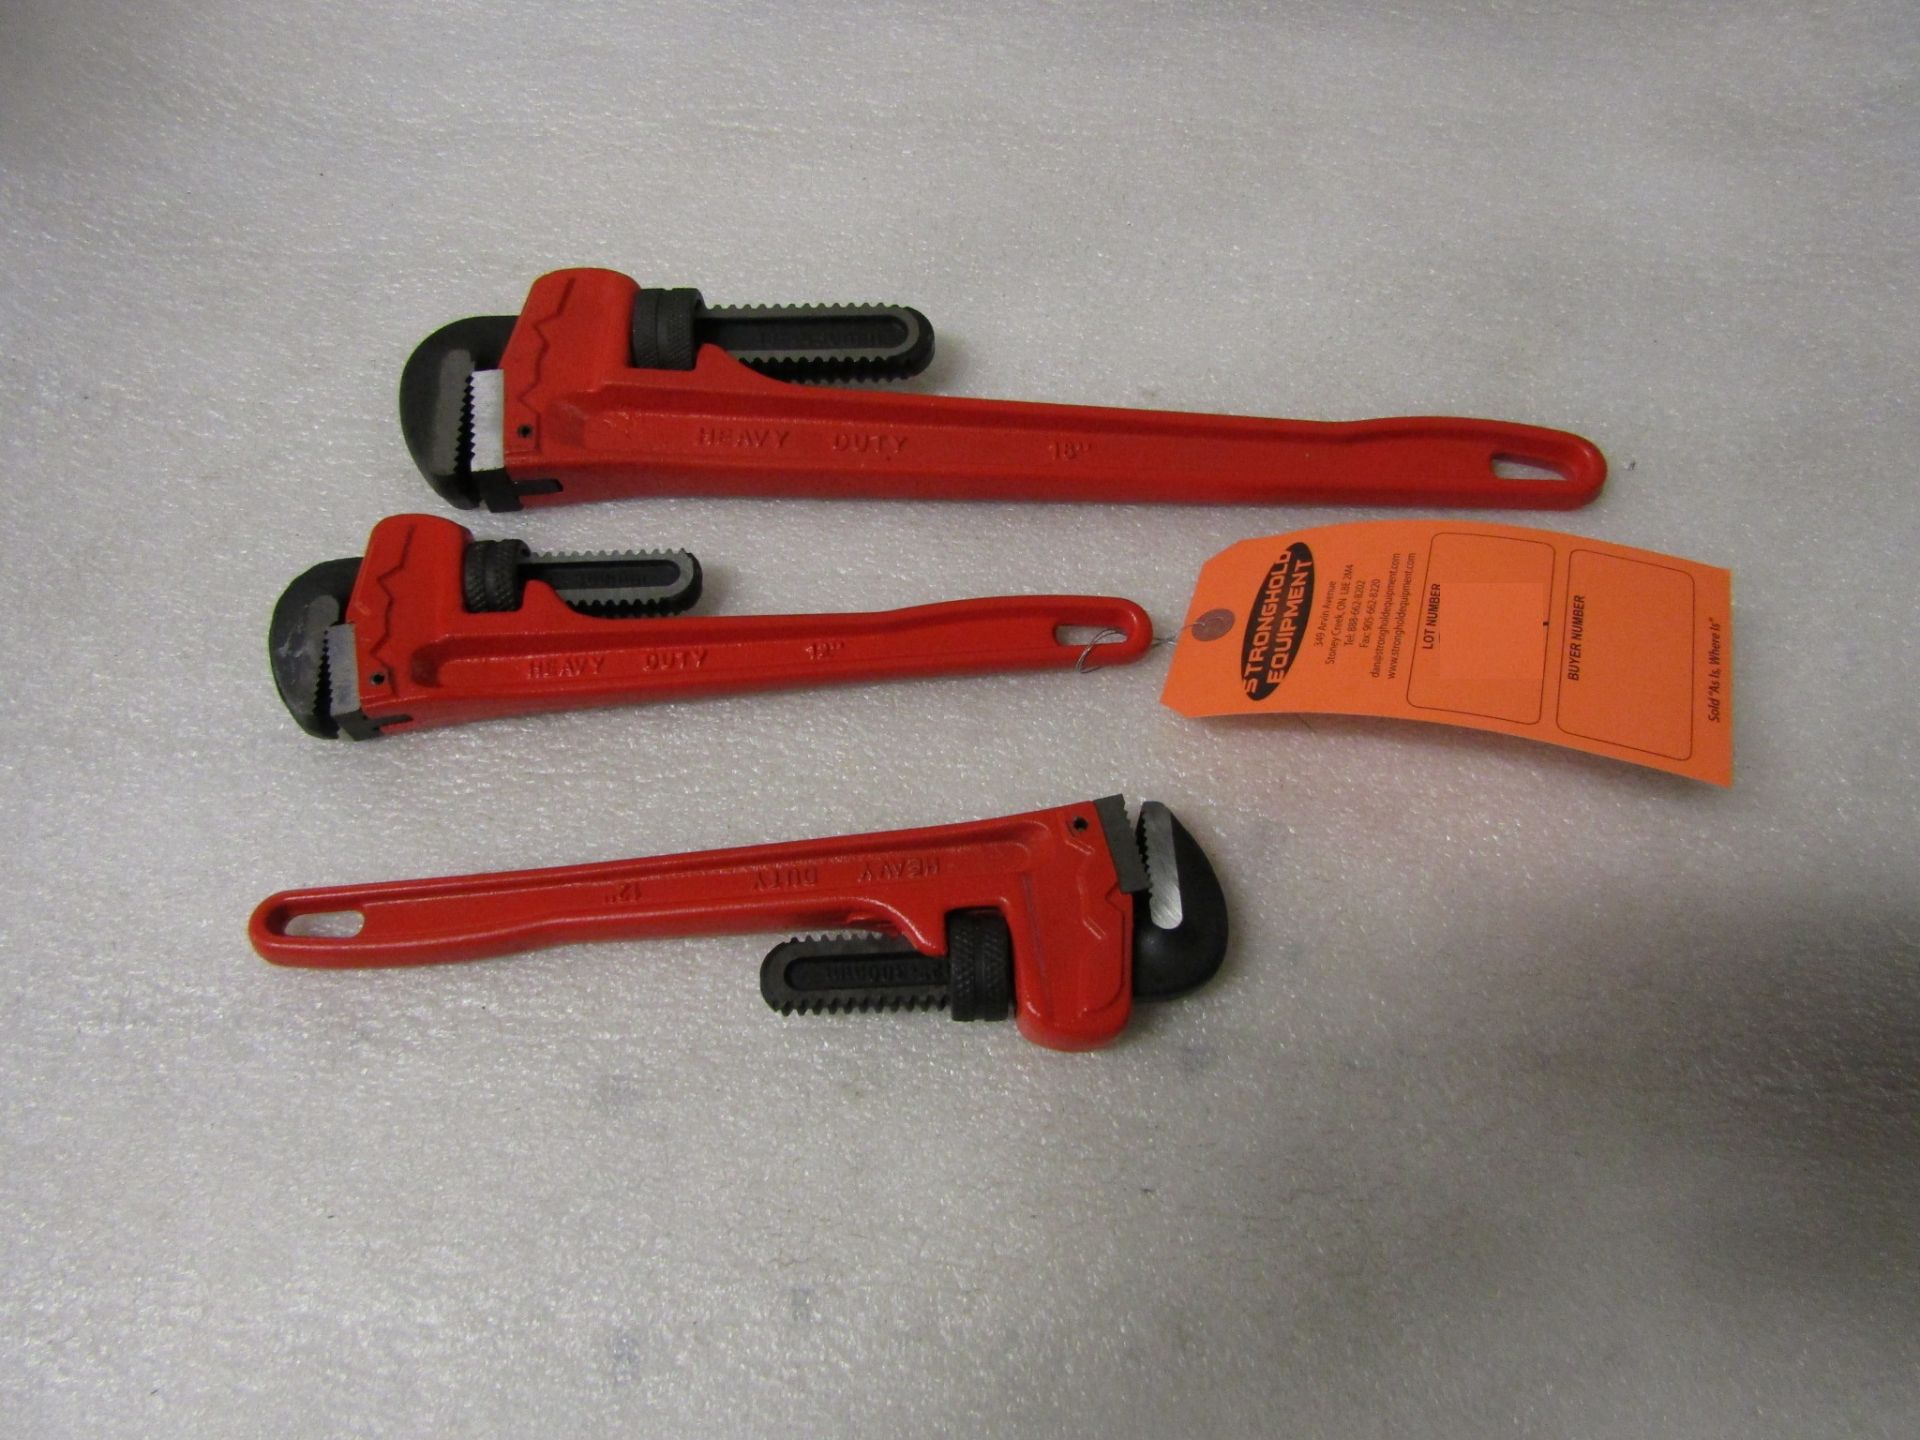 Lot of 3 Pipe Wrenches - brand new